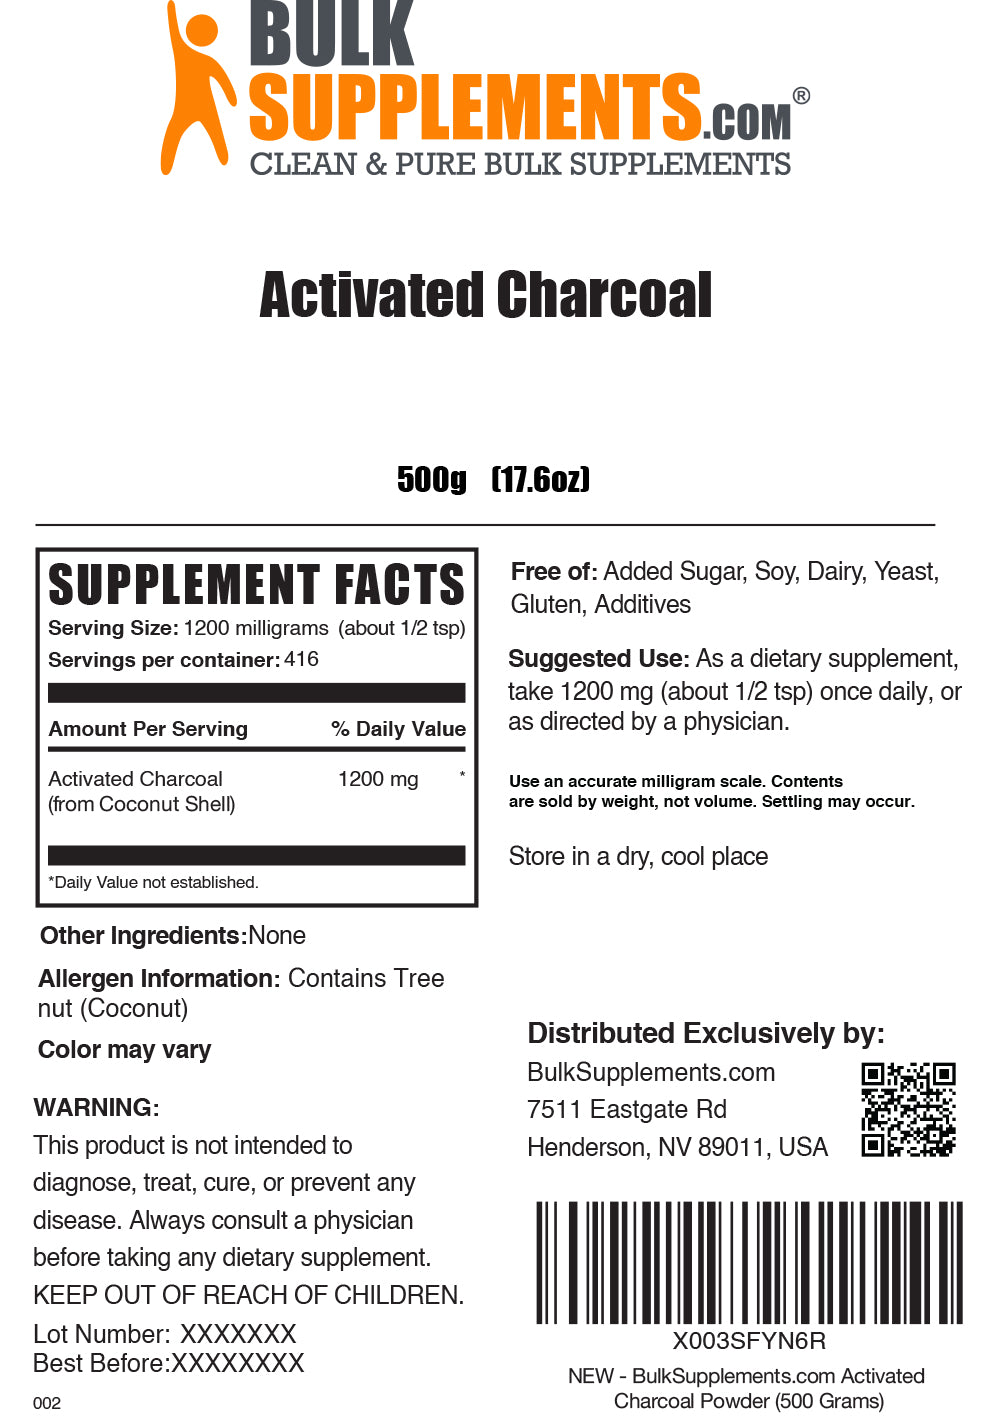 Activated charcoal powder label 500g